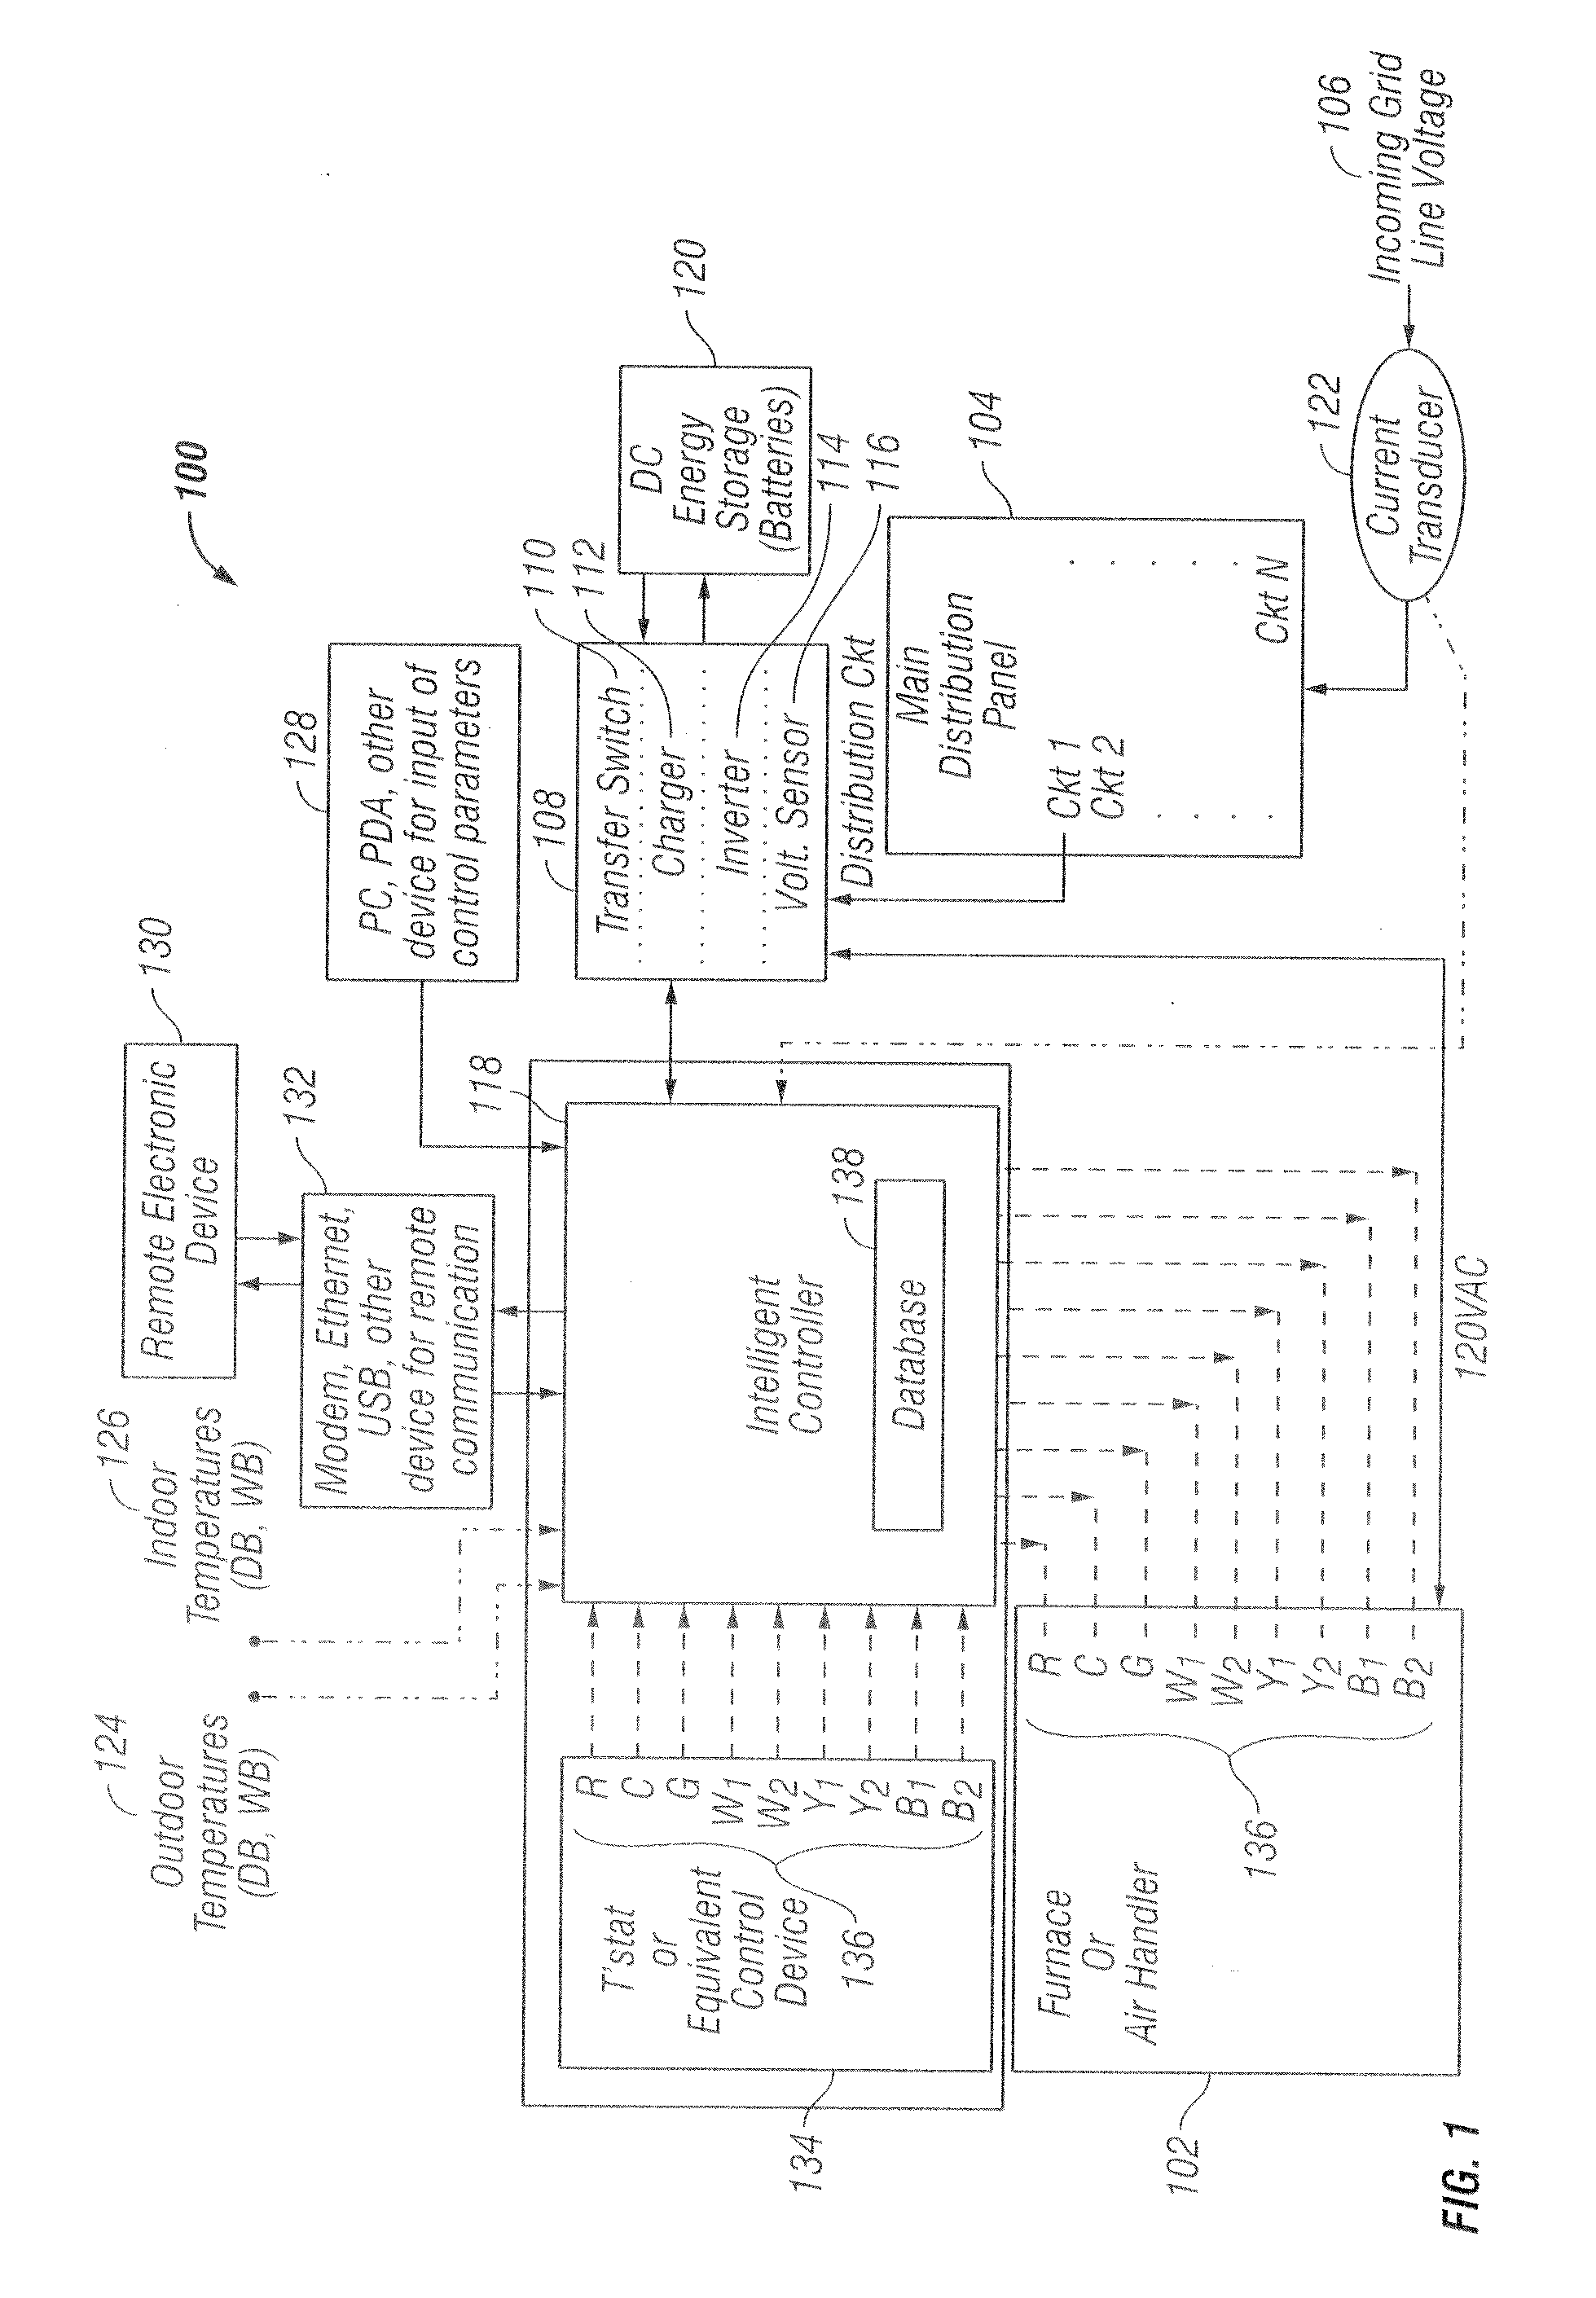 Intelligent auxiliary power supply system with current and temperature monitoring capabilities